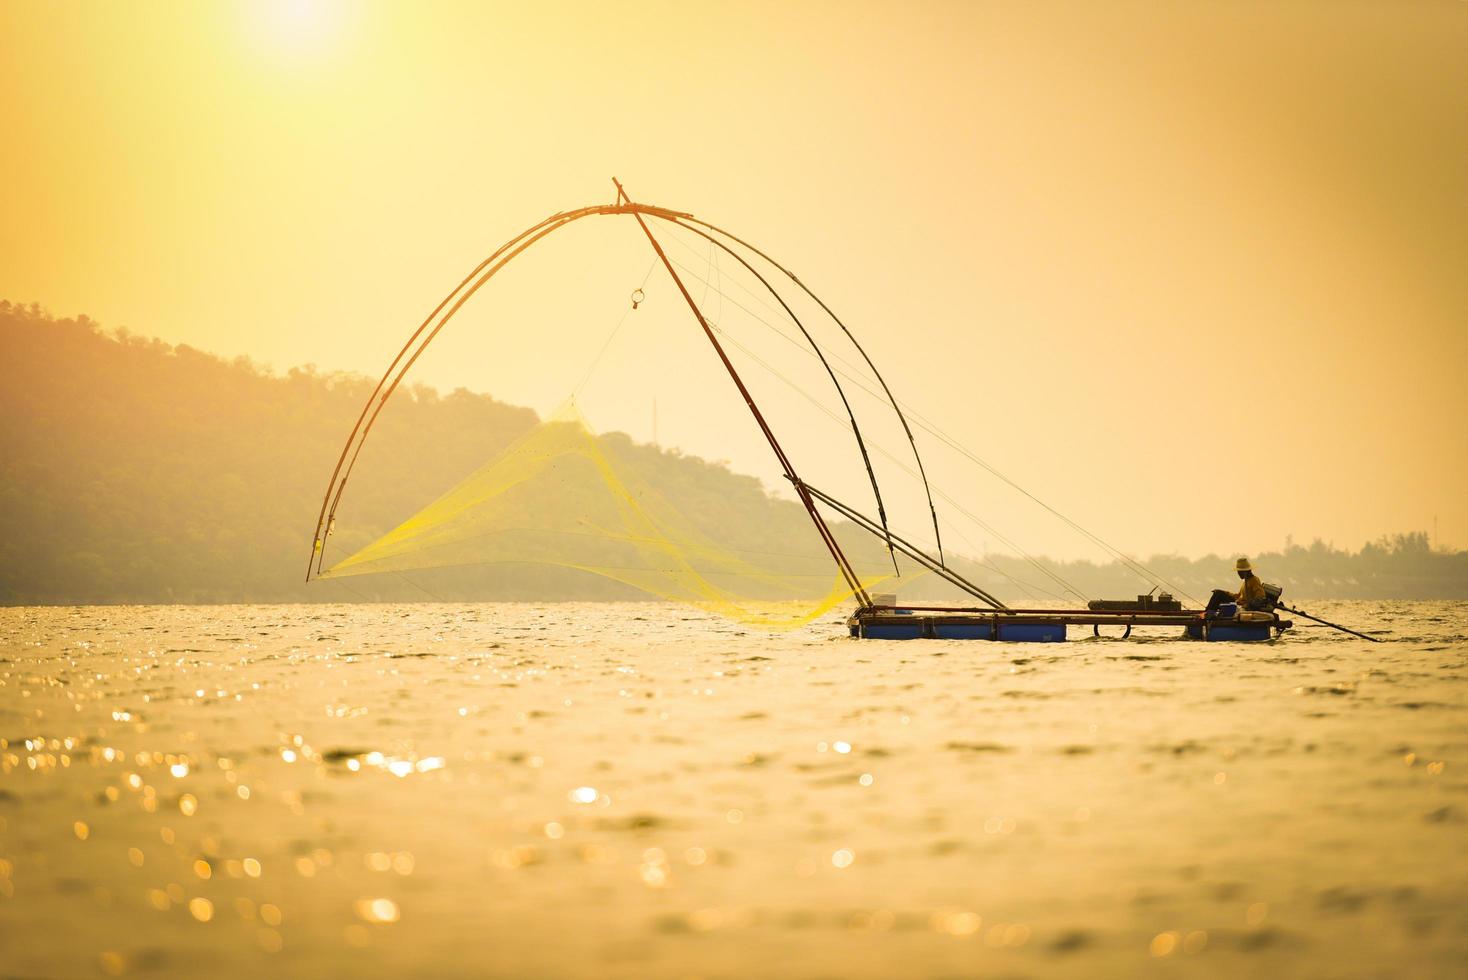 Asia fisherman net using on wooden boat casting net sunset or sunrise in the river - Silhouette fisherman boat with mountain island background on the sea ocean photo